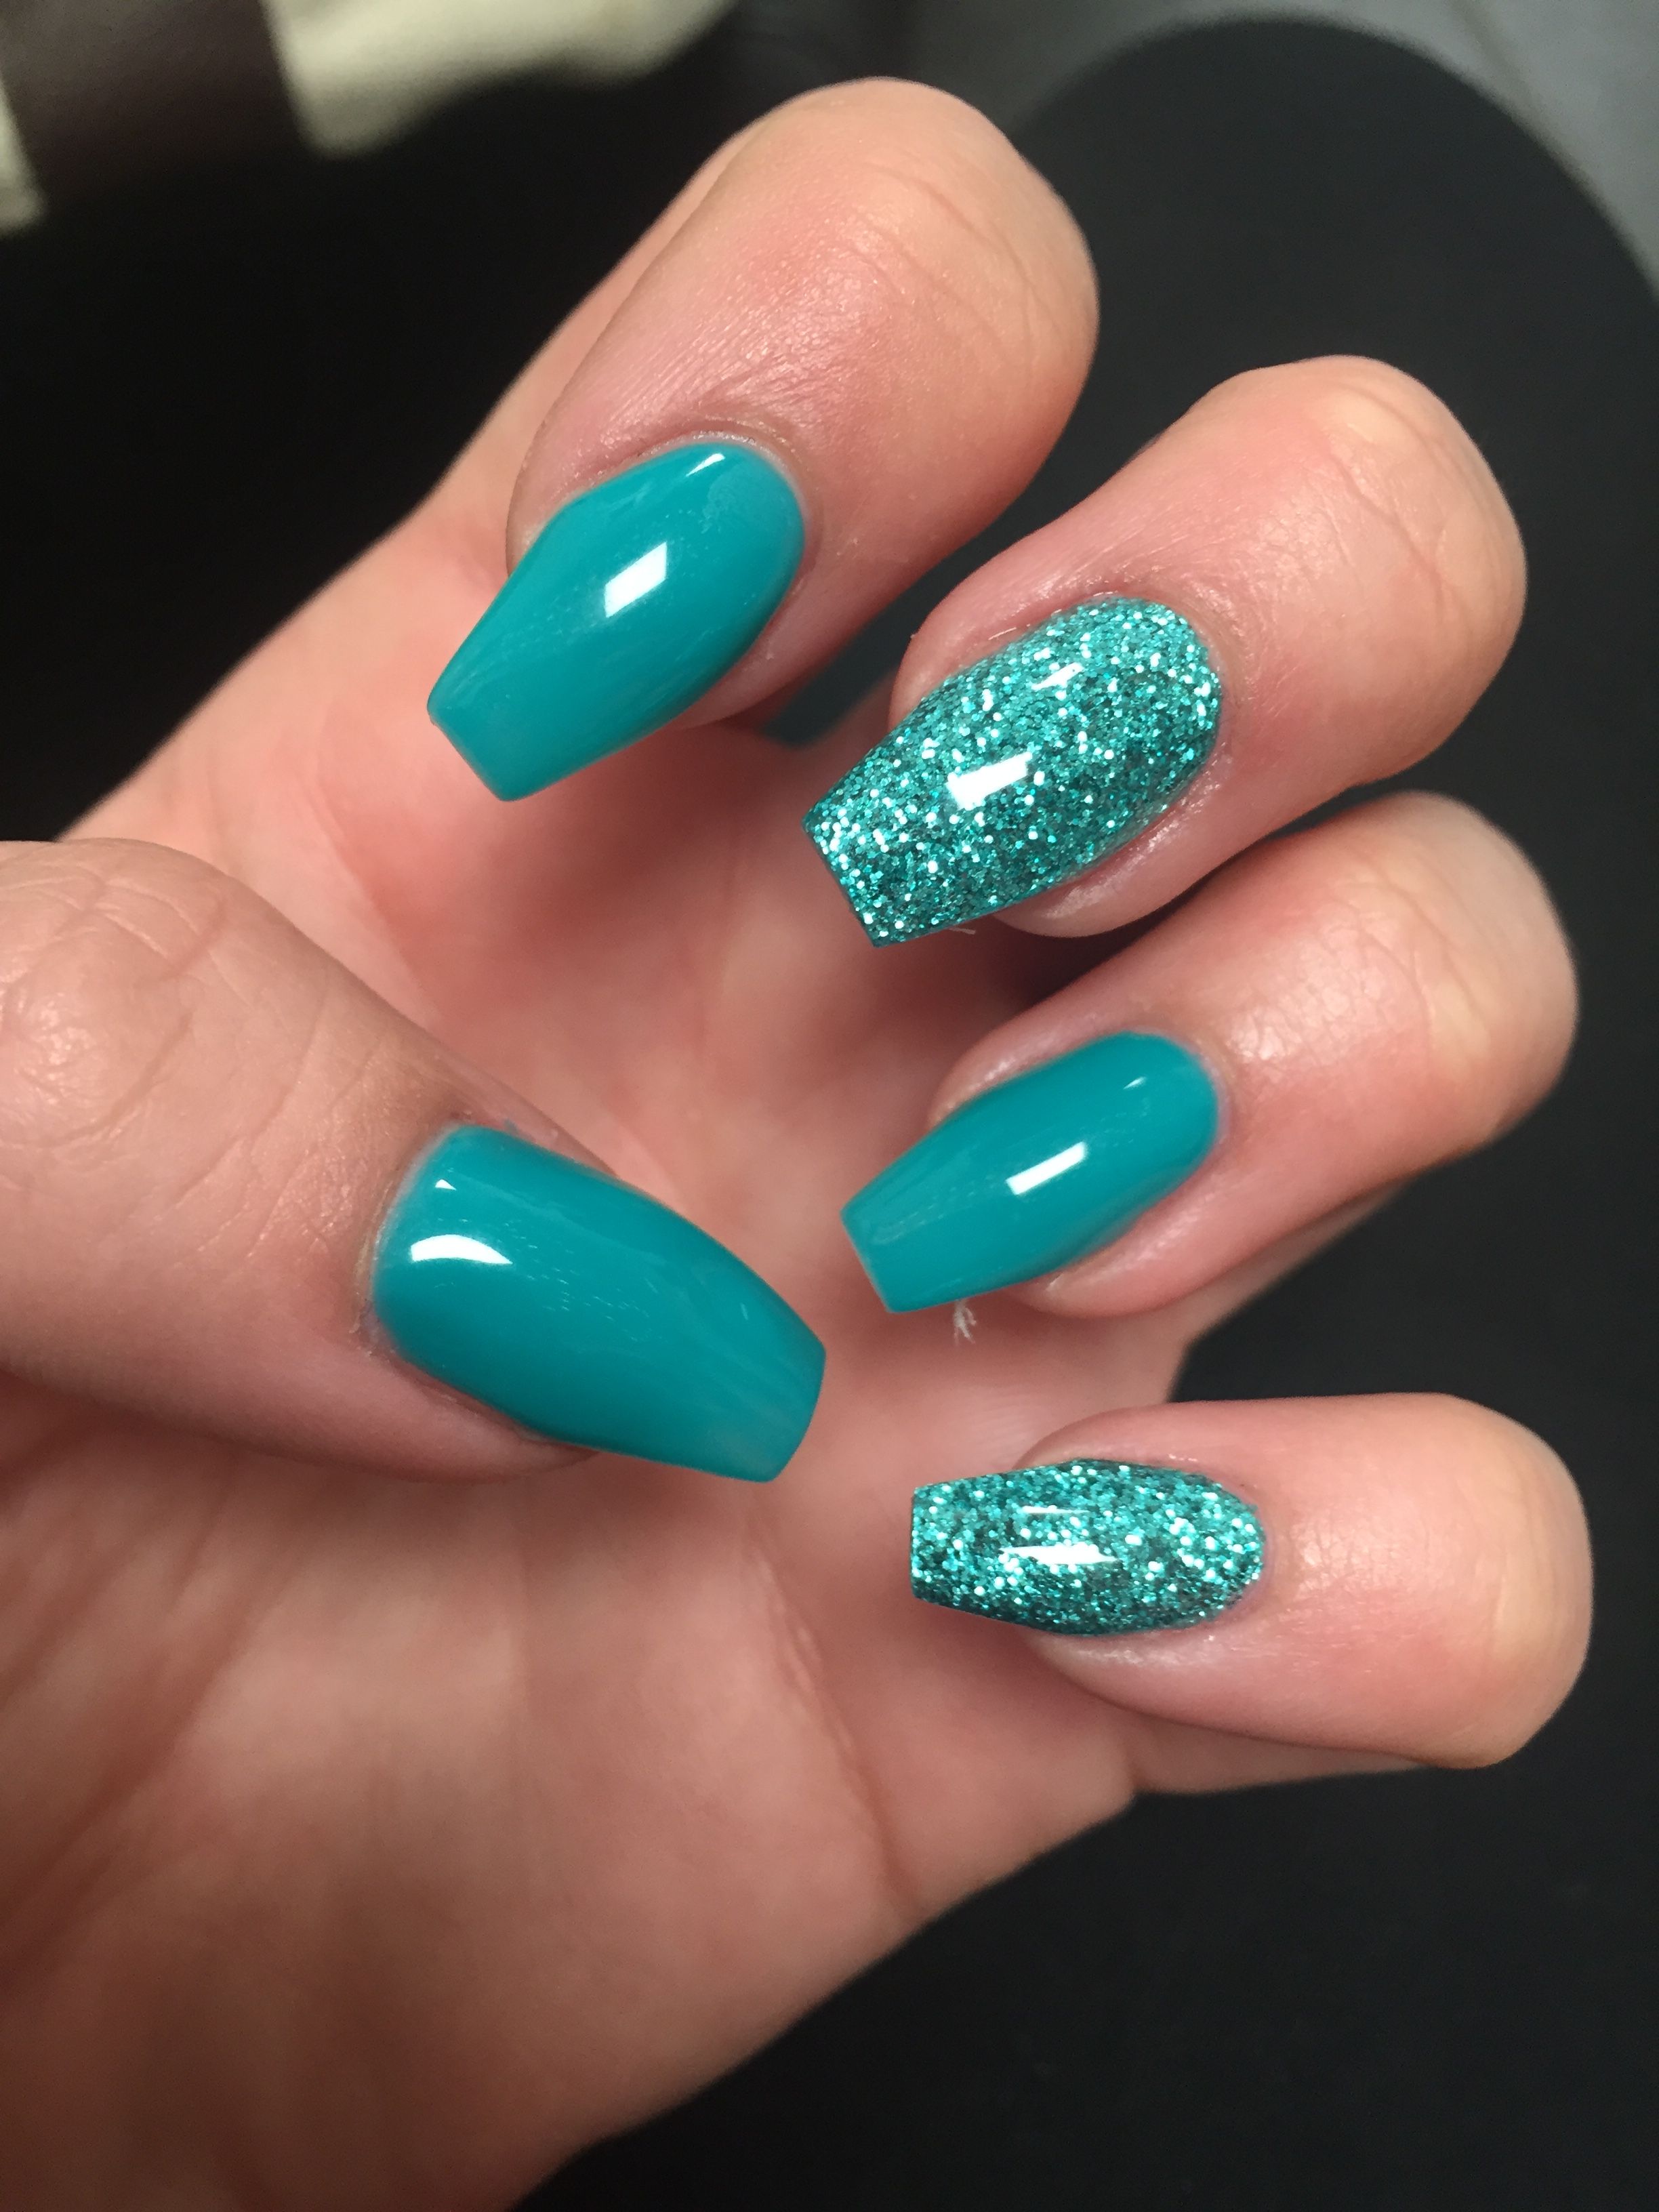 Turquoise Tint Nails Complement Your Radiance With These Winter Nail Hues